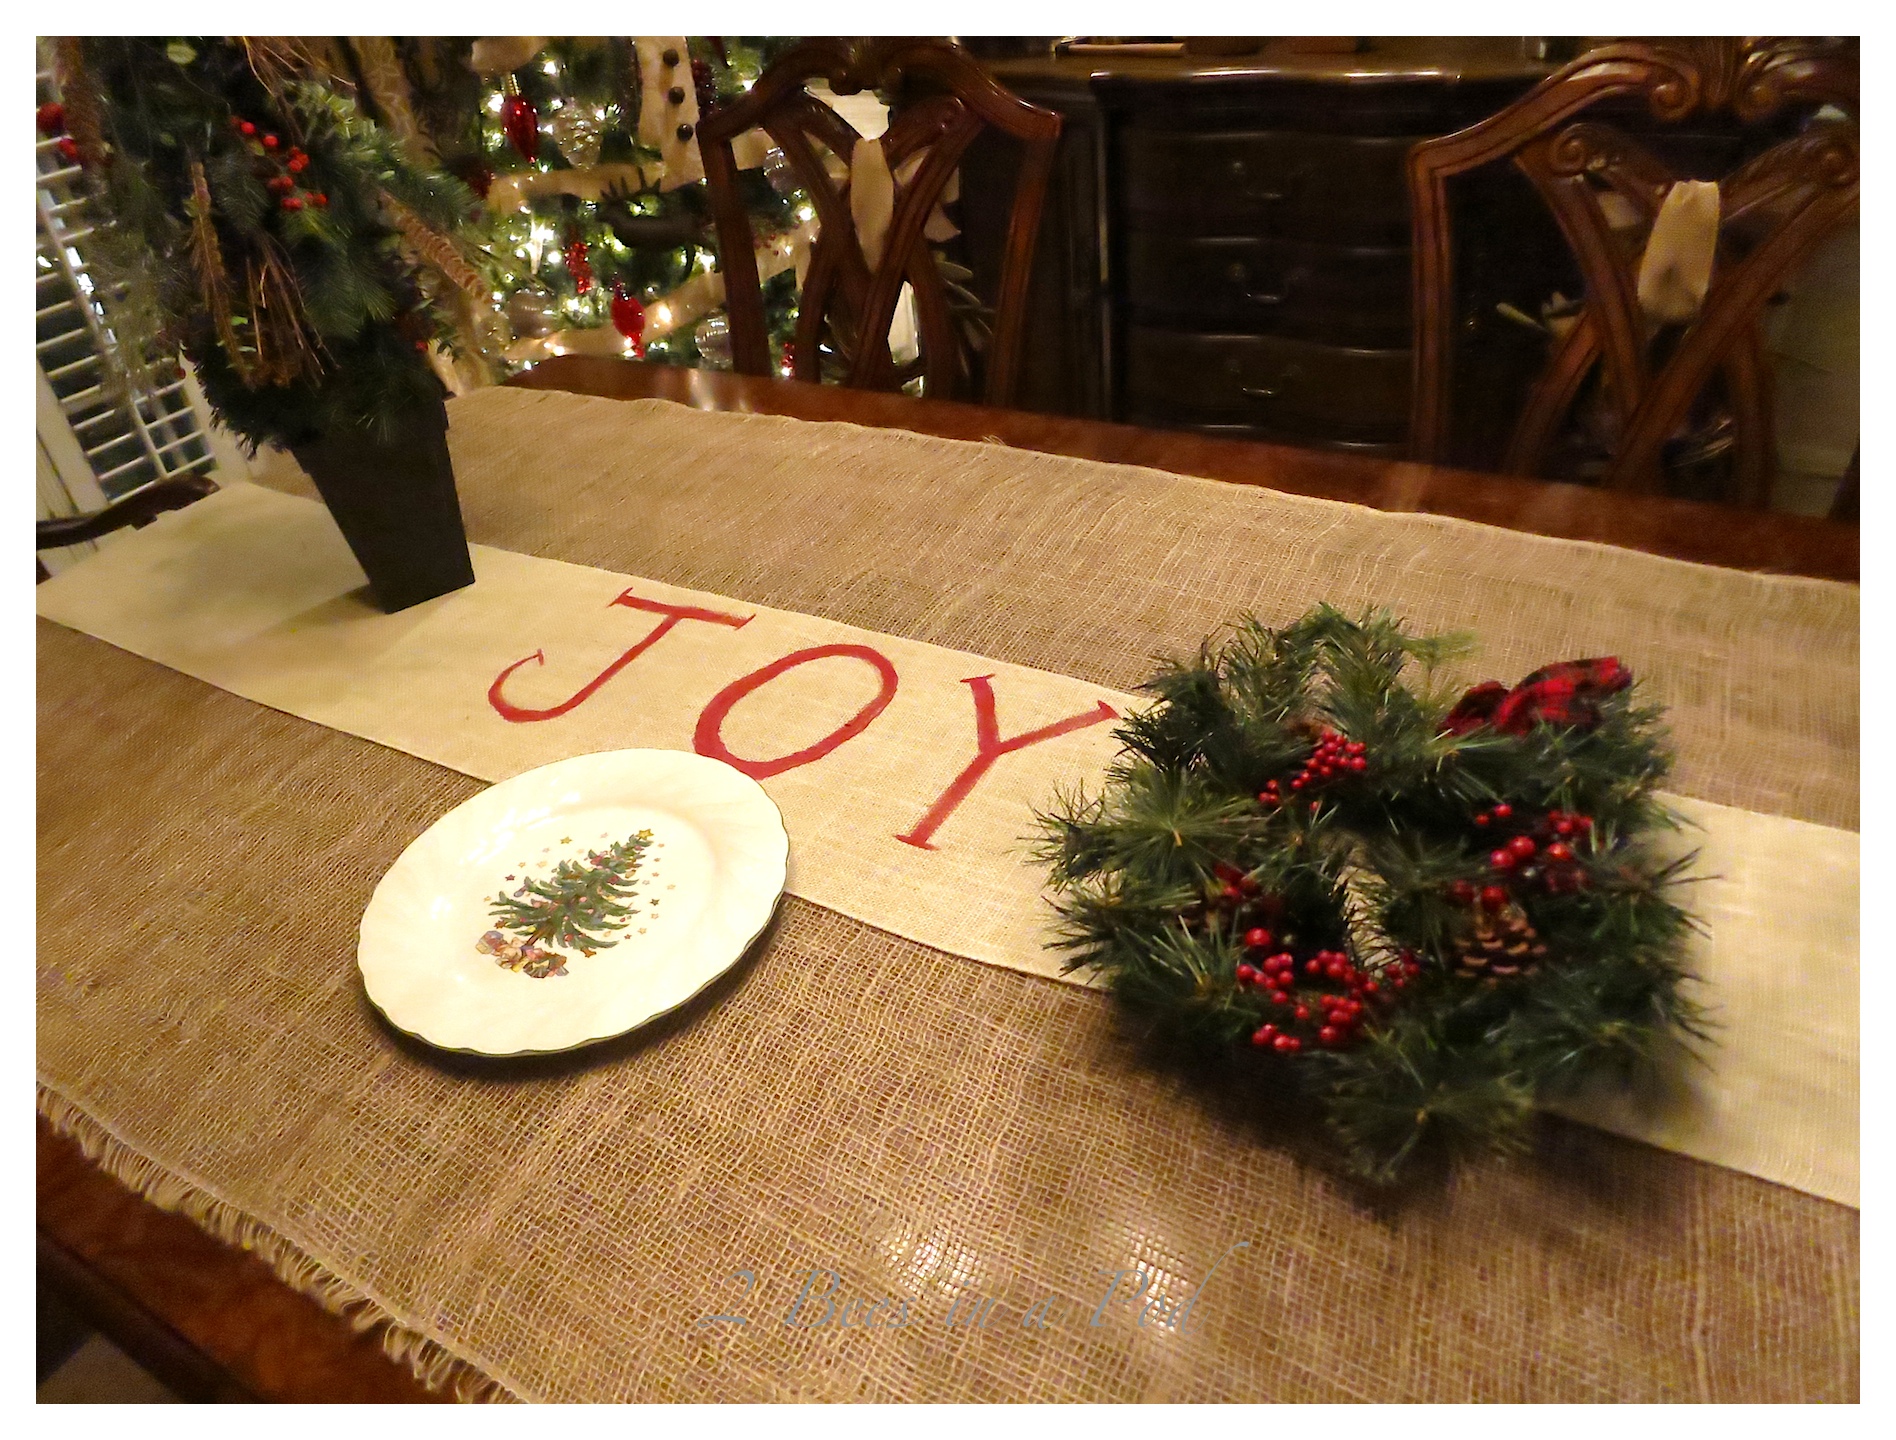 DIY hand painted Christmas table runner for the dining room. I chose to paint JOY as my message :) I love the rustic burlap.